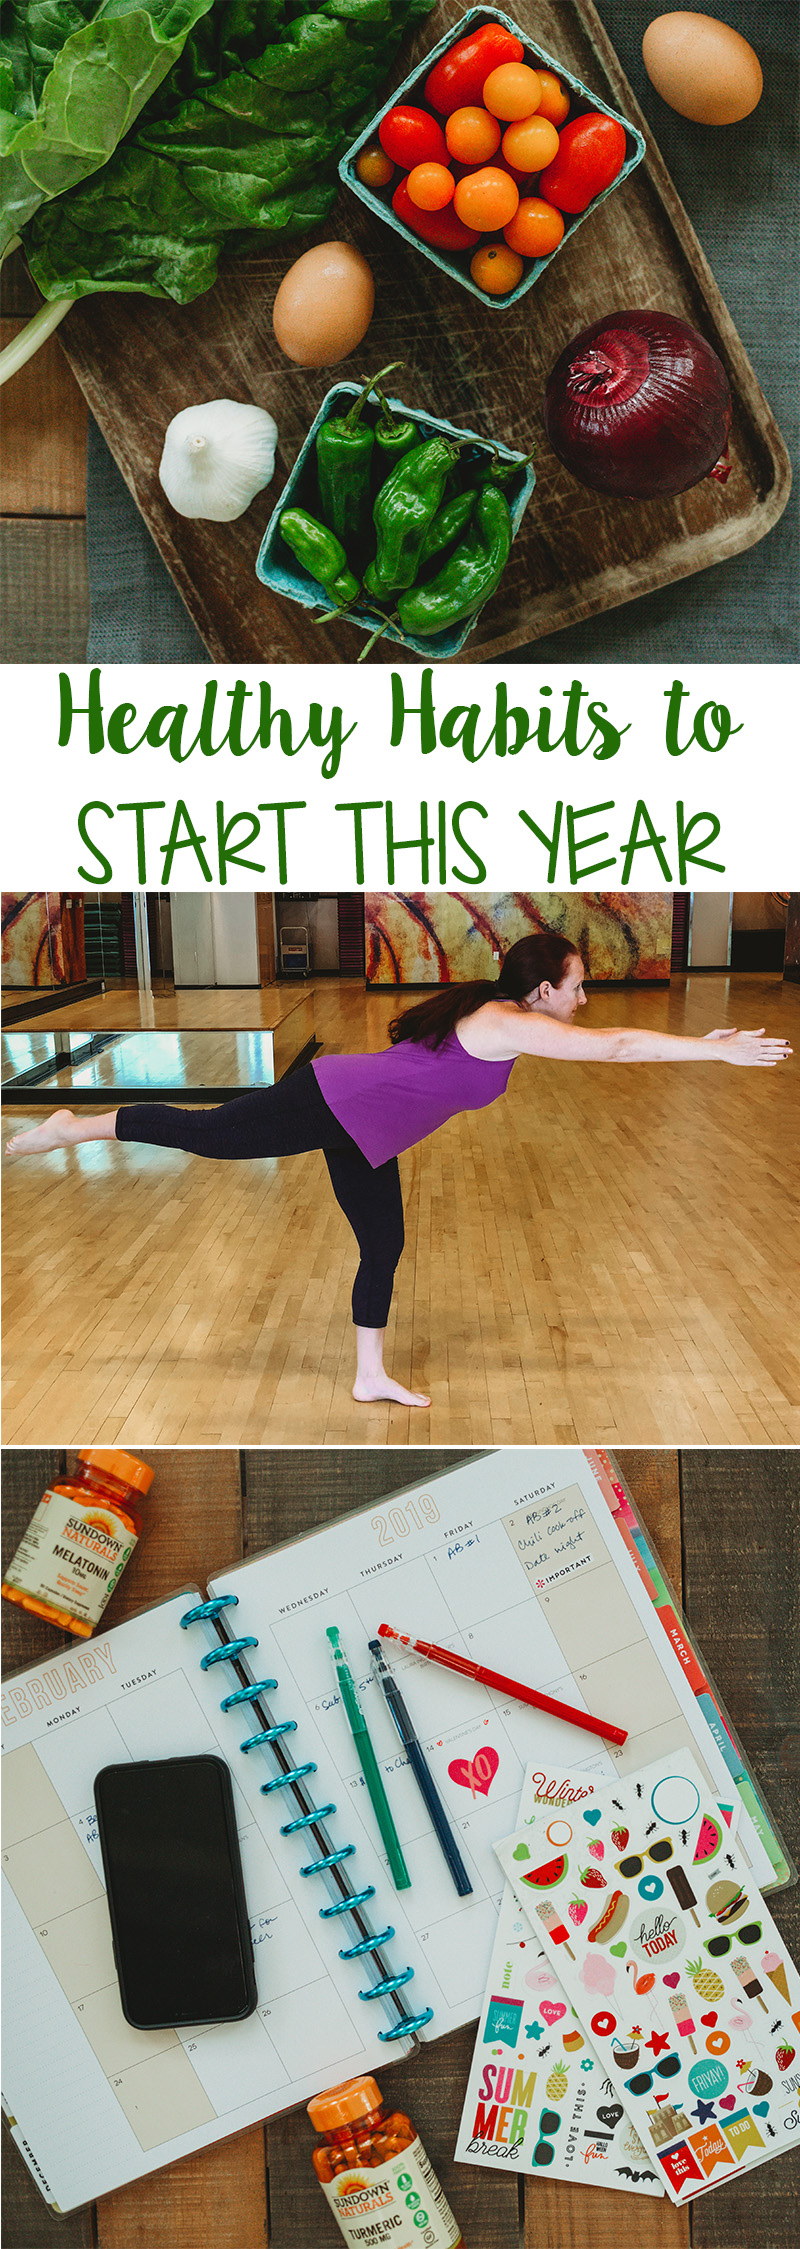 Healthy Habits to Start This Year